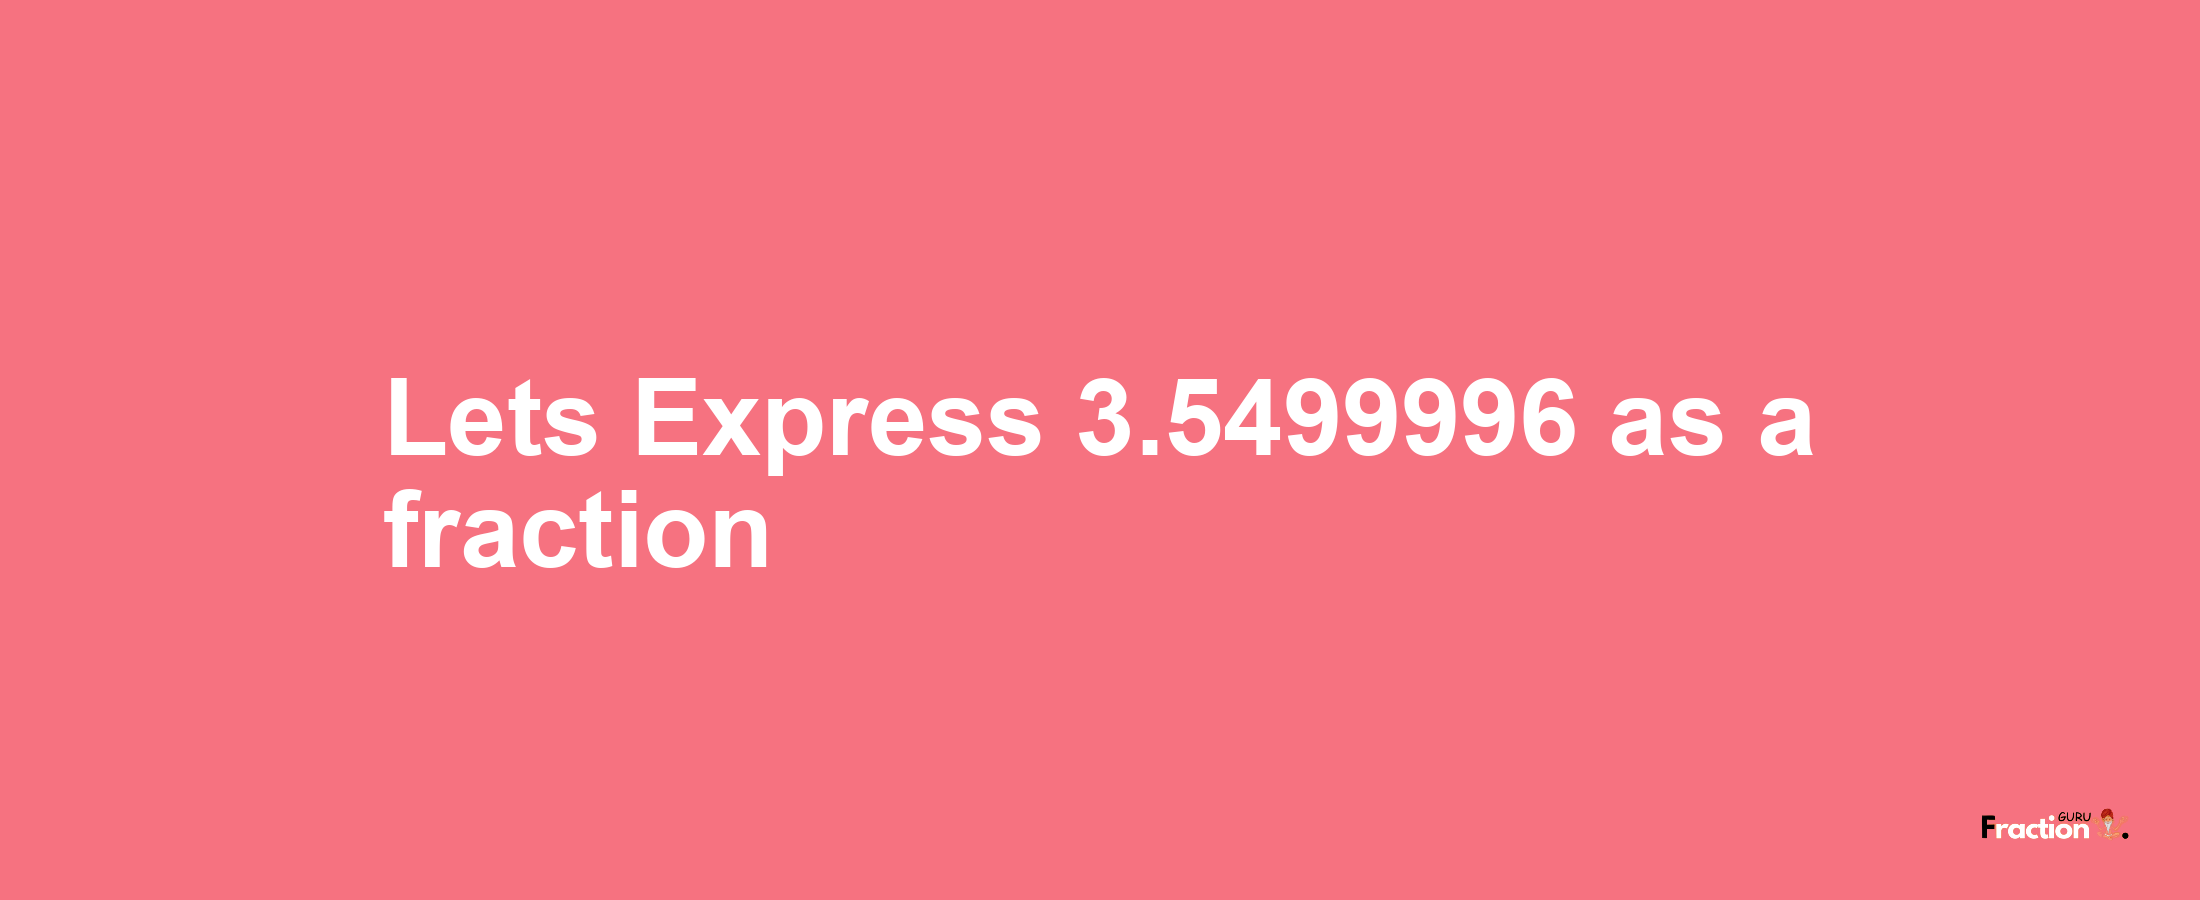 Lets Express 3.5499996 as afraction